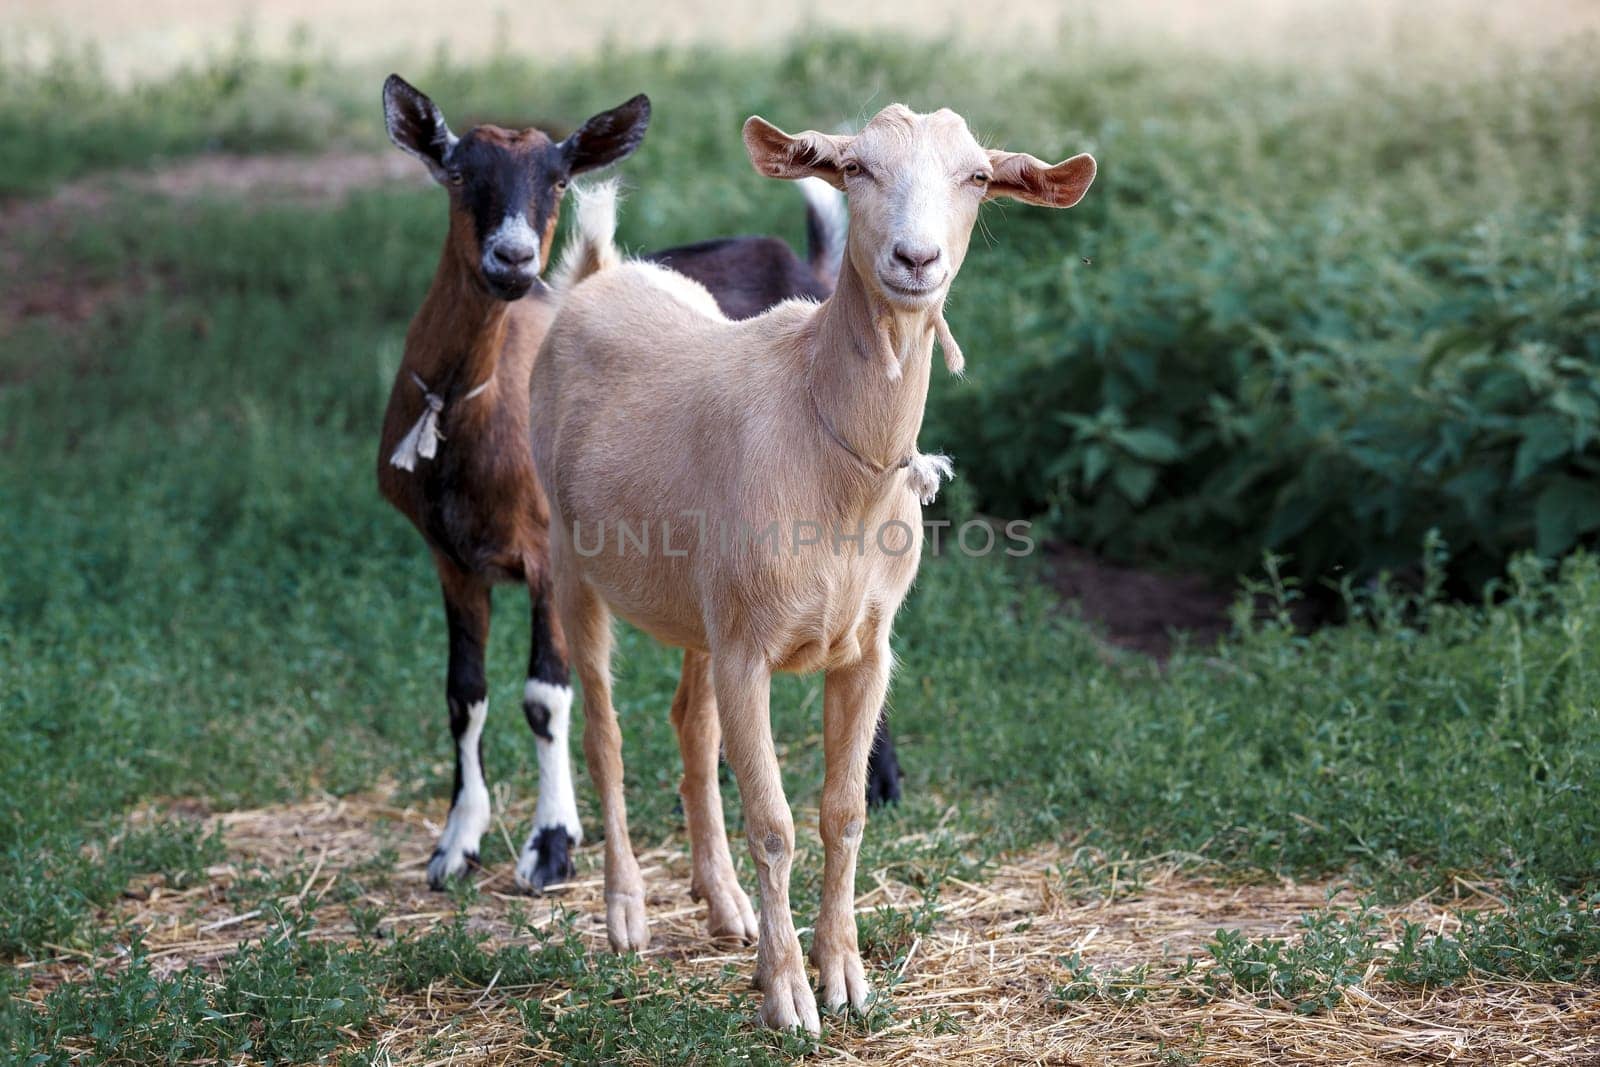 The goats were interested in the photographer, they are careful. Horizontal photo.